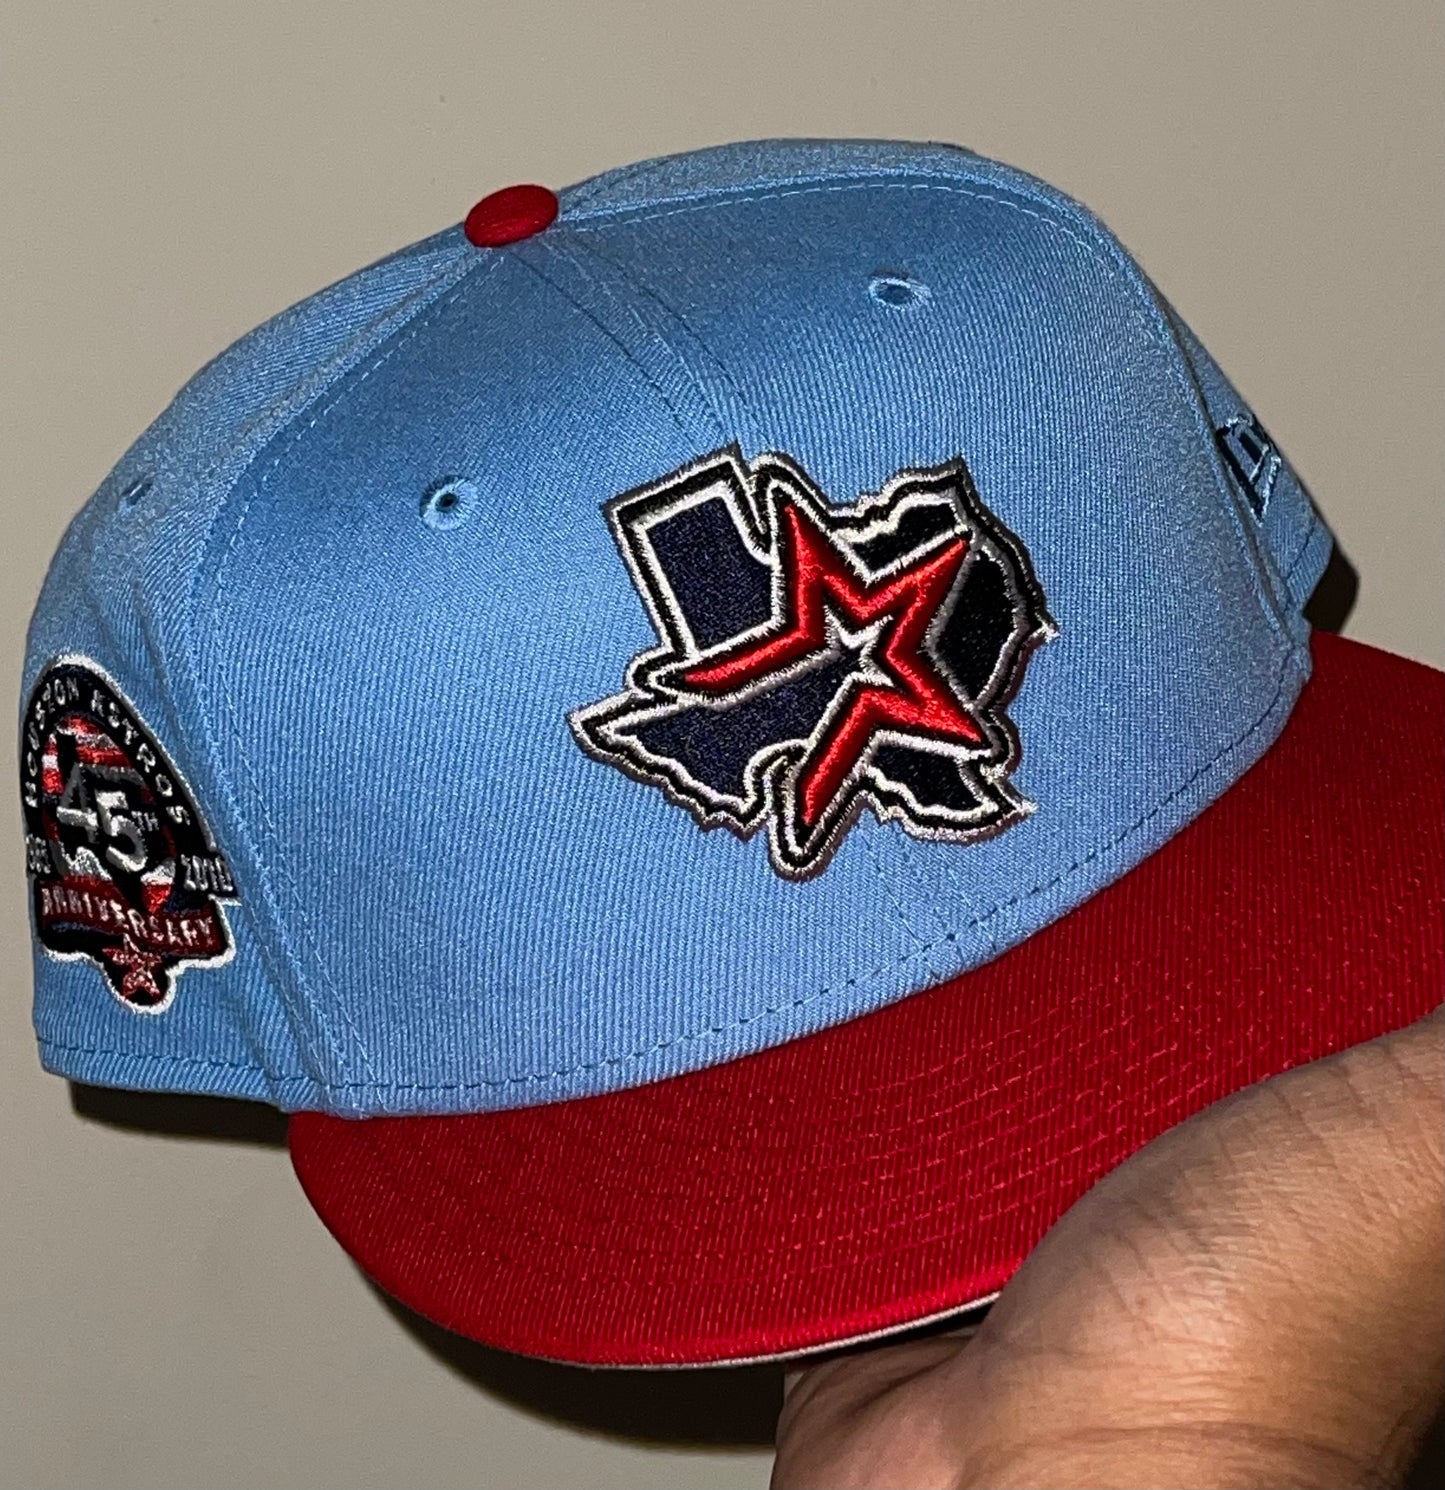 Houston Astros 45th Anniversary Side Patch Oilers Inspired Fitted Hat New Era 5950 (Blue/Red/Gray)